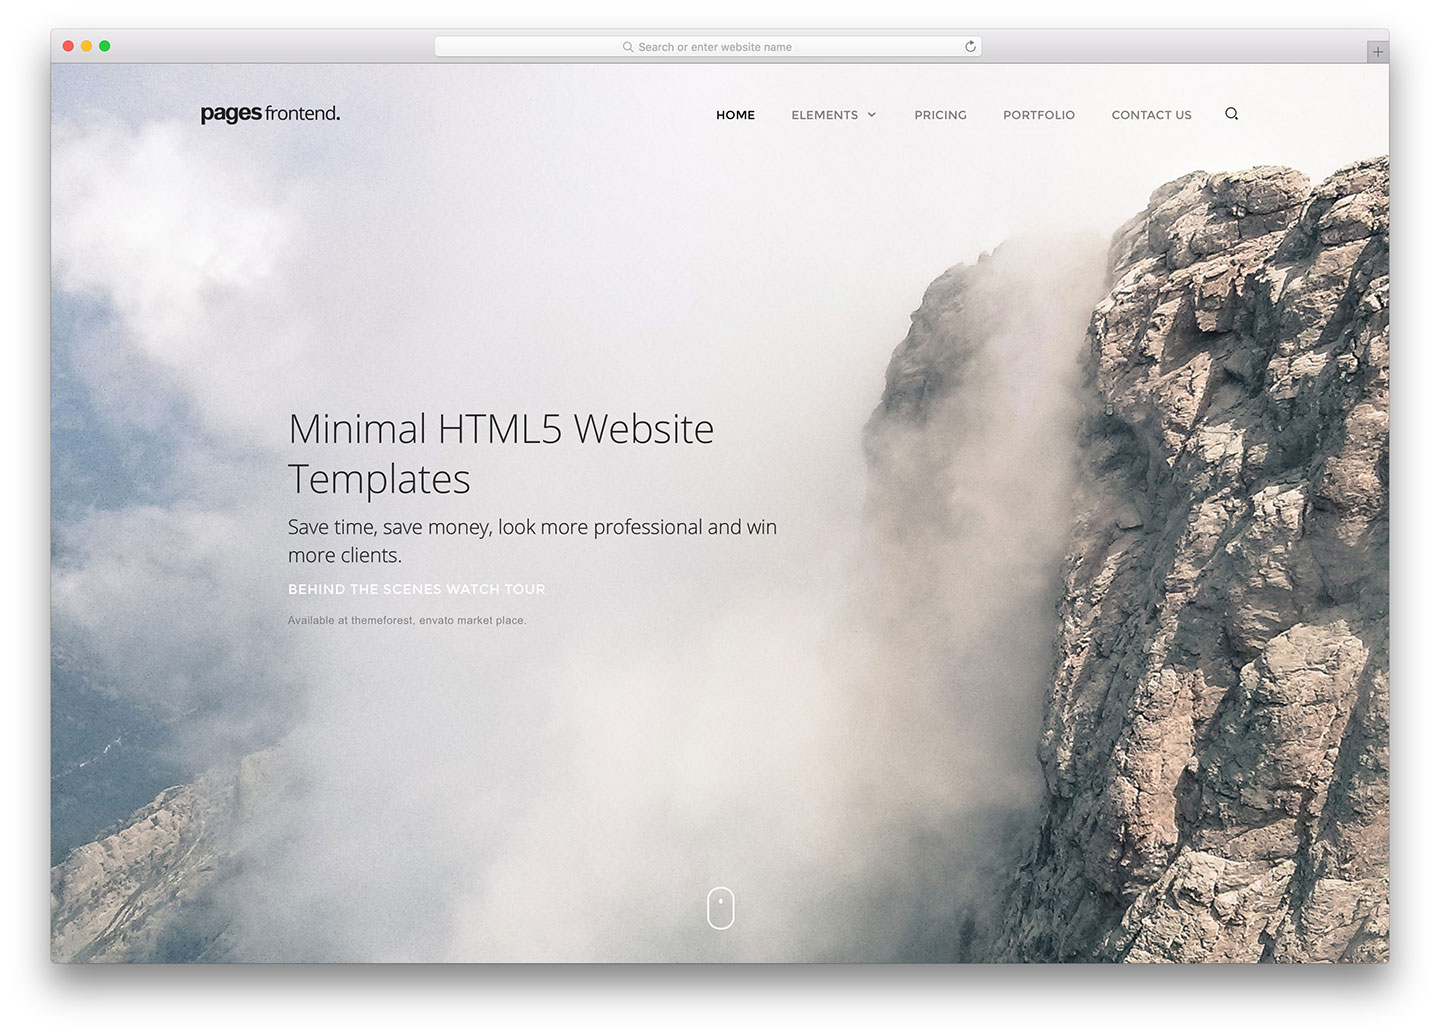 A clean and elegant website design featuring a simple layout, clean typography, and high-quality visuals of a foggy mountain landscape.